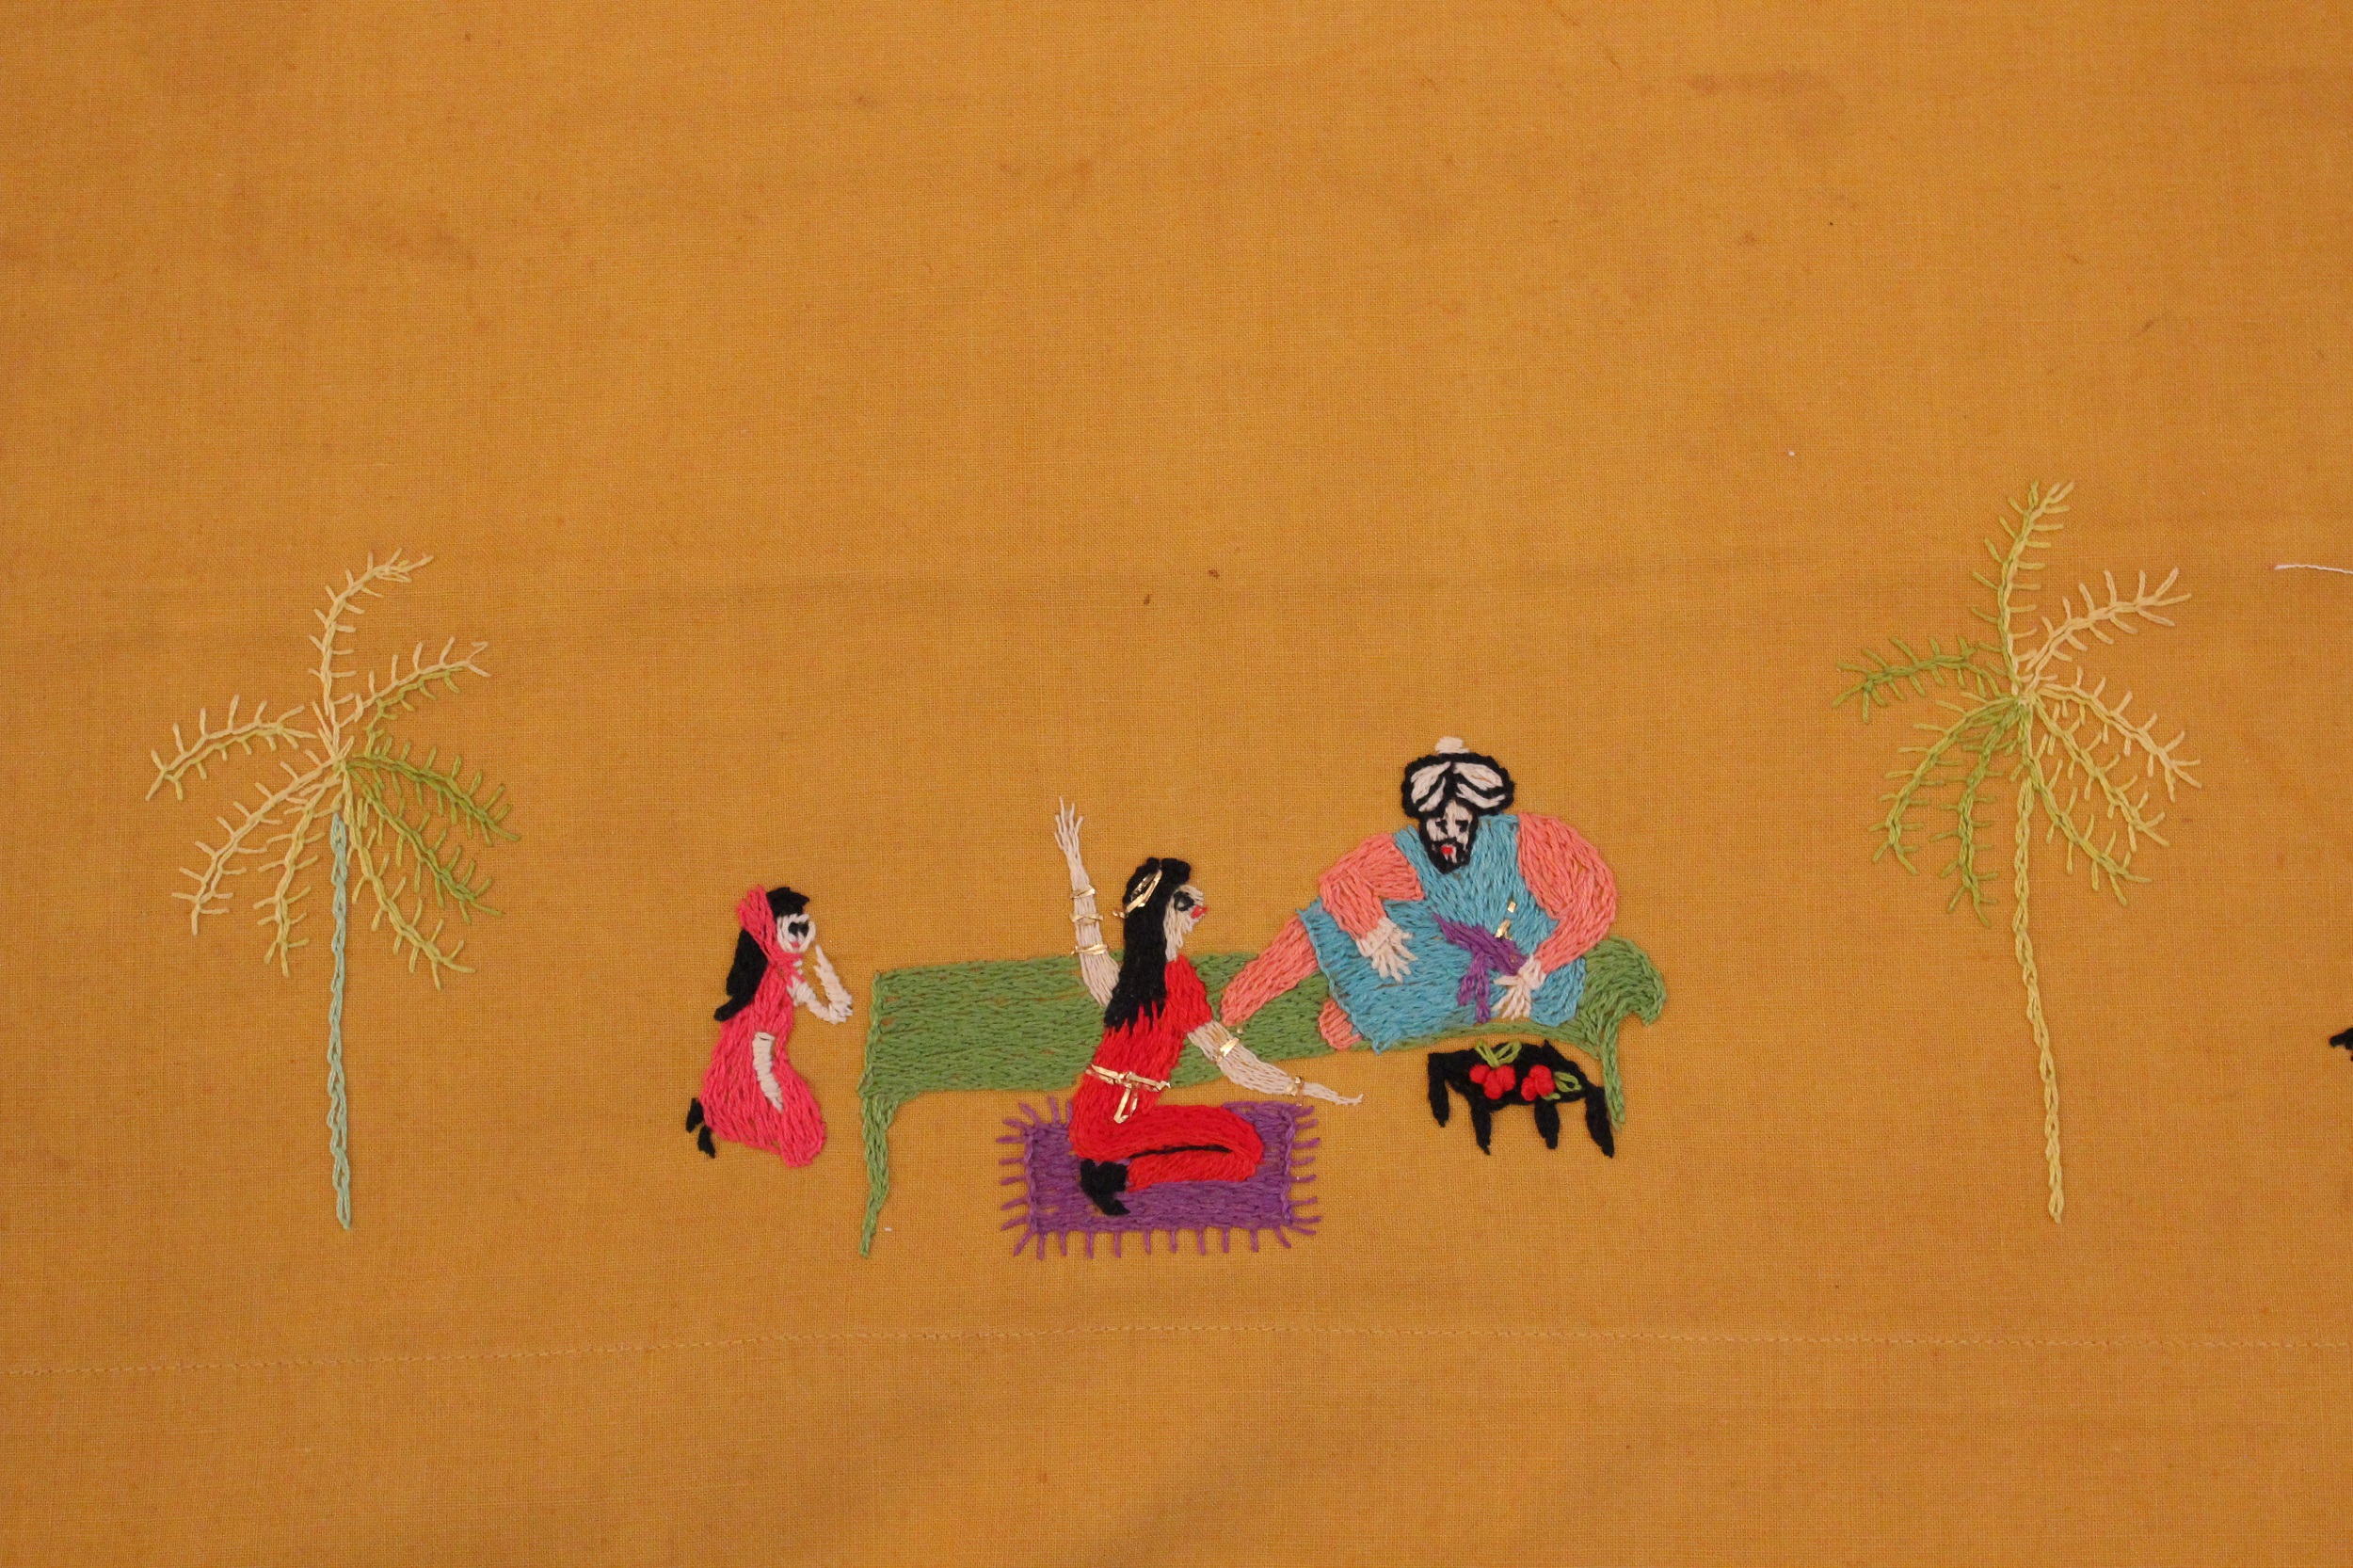 Embroidered scene of a man seated on a low green couch, conversing with two young girls